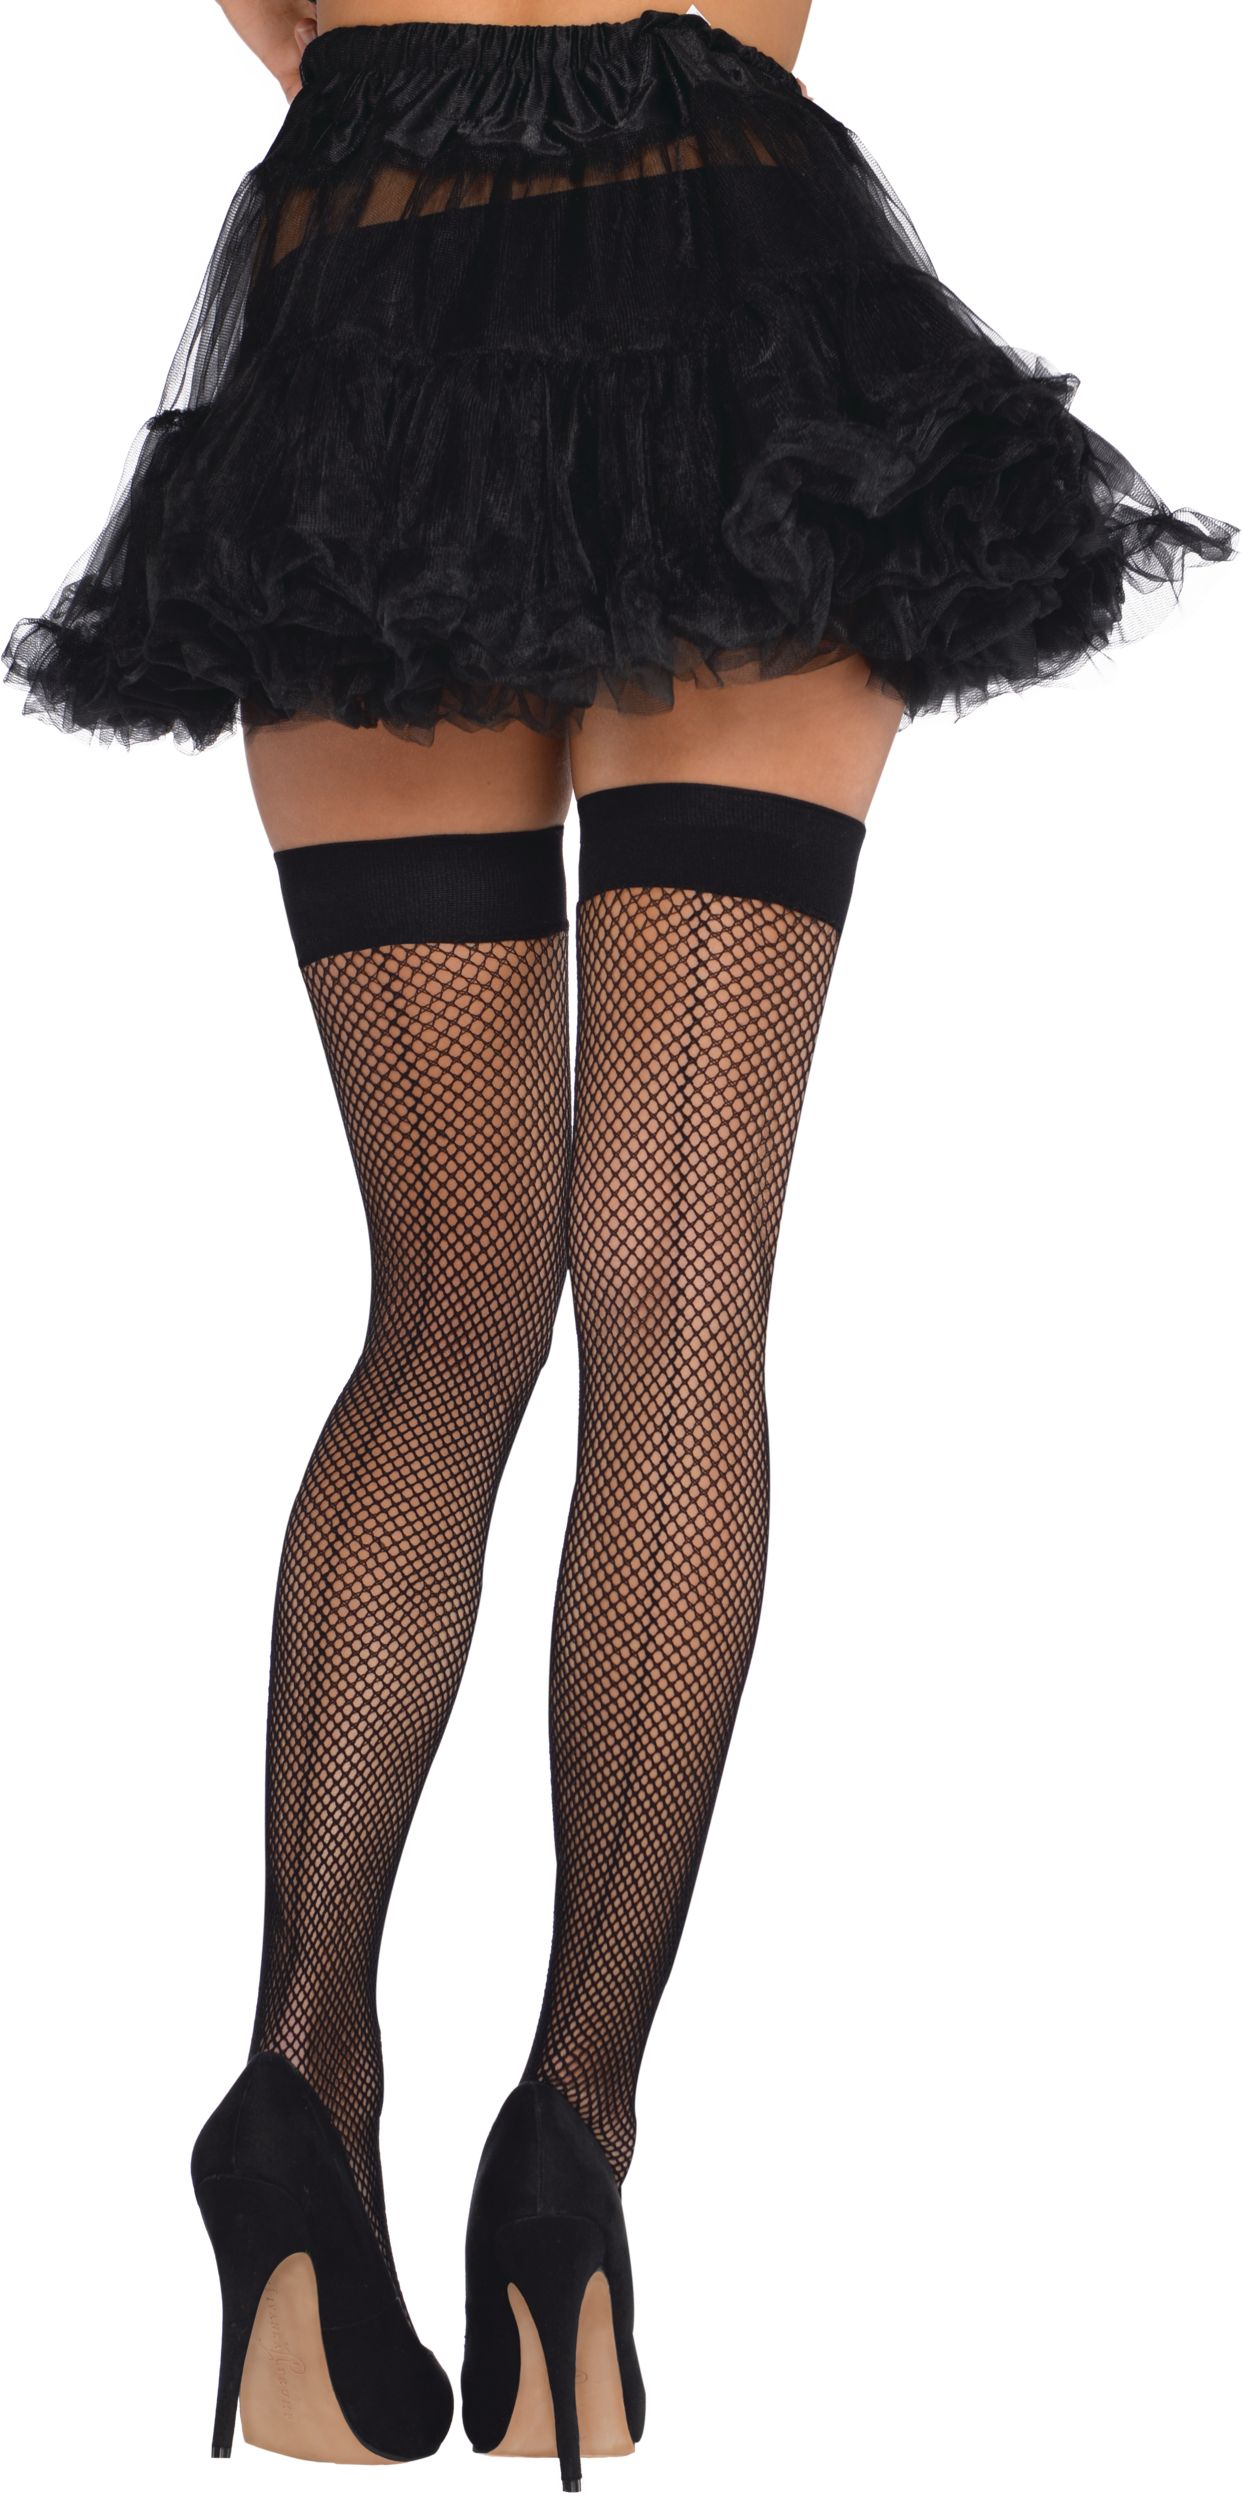 Adult Thigh-High Back Seam Fishnet Stocking Tights, Black, One Size,  Wearable Costume Accessory for Halloween